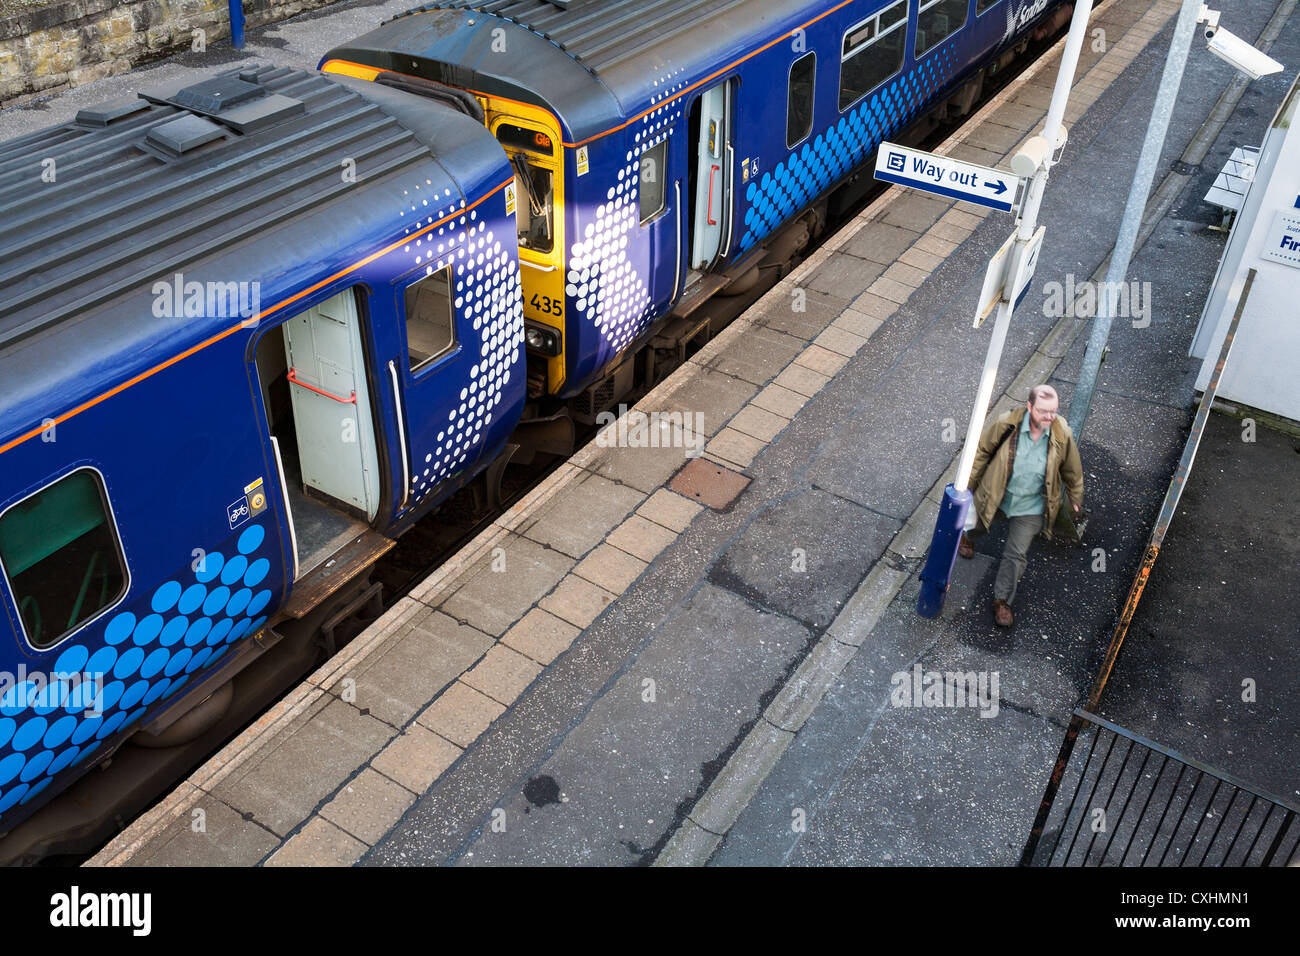 Middle aged man, possibly a commuter, leaving a train in Clarkston near Glasgow. Stock Photo